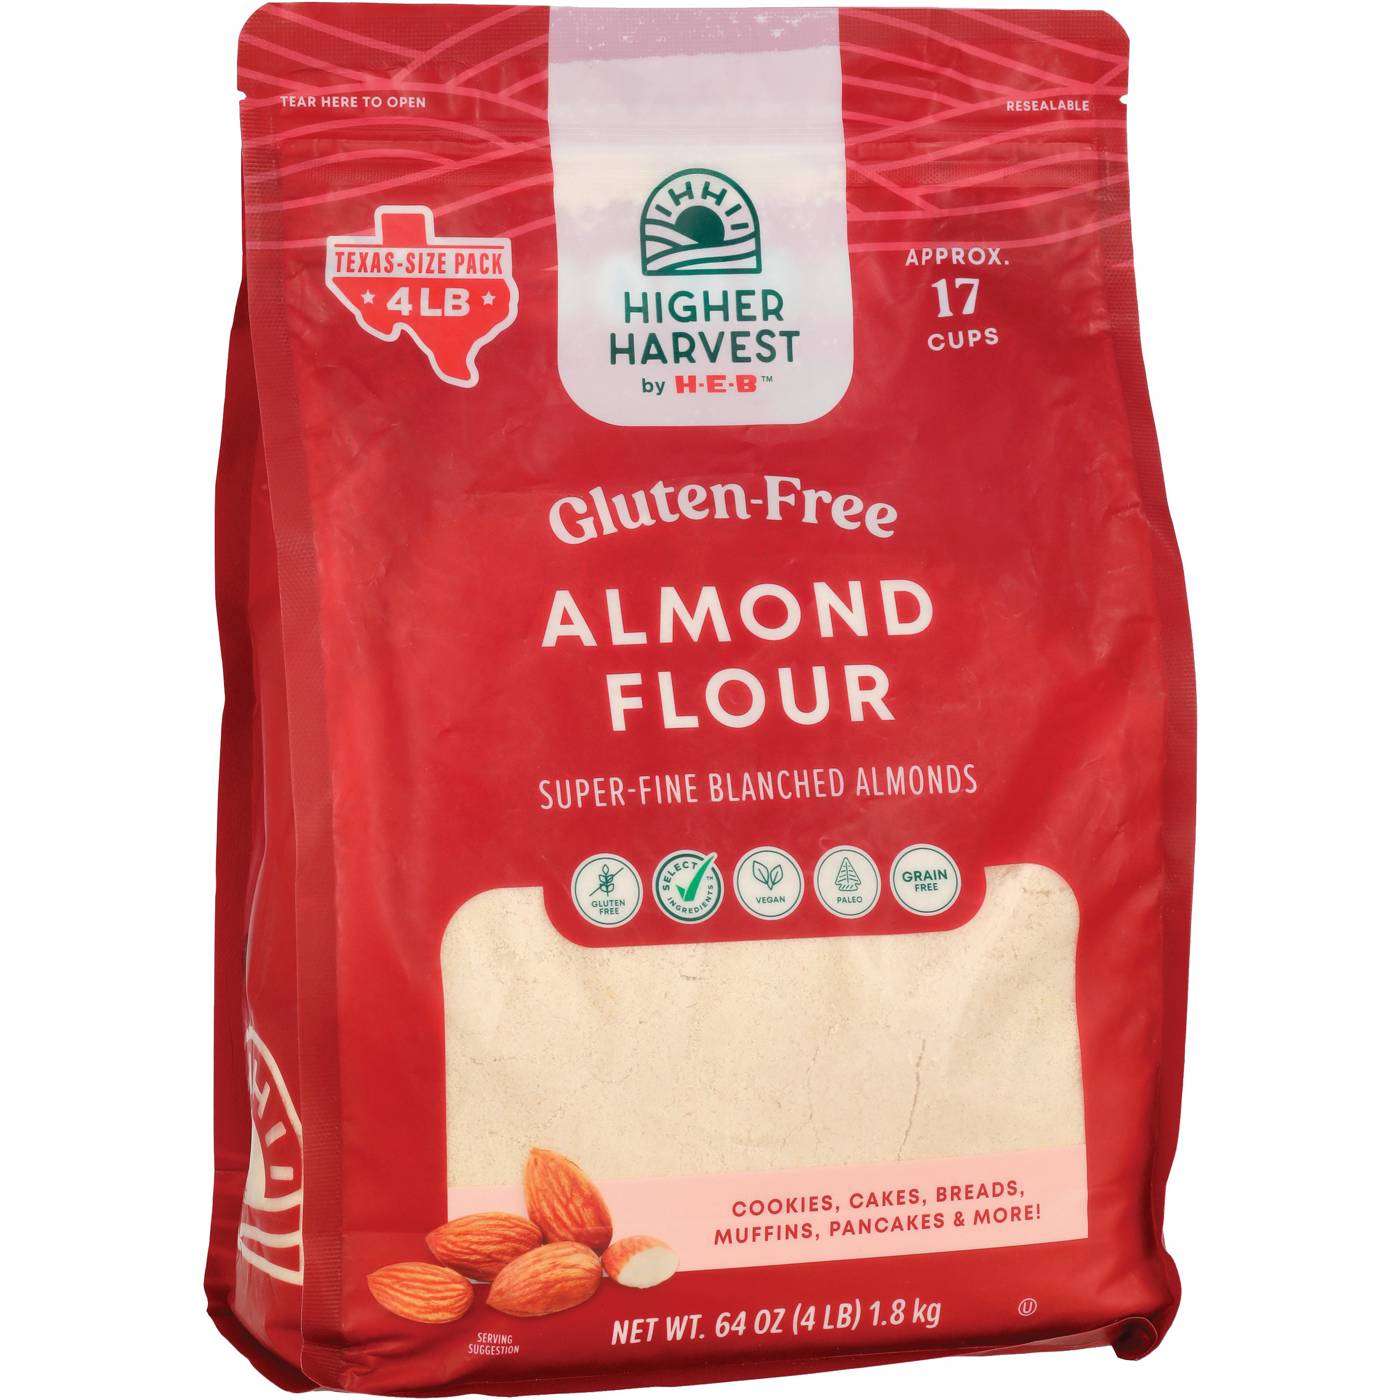 Higher Harvest by H-E-B Gluten-Free Almond Flour – Texas-Size Pack; image 3 of 3